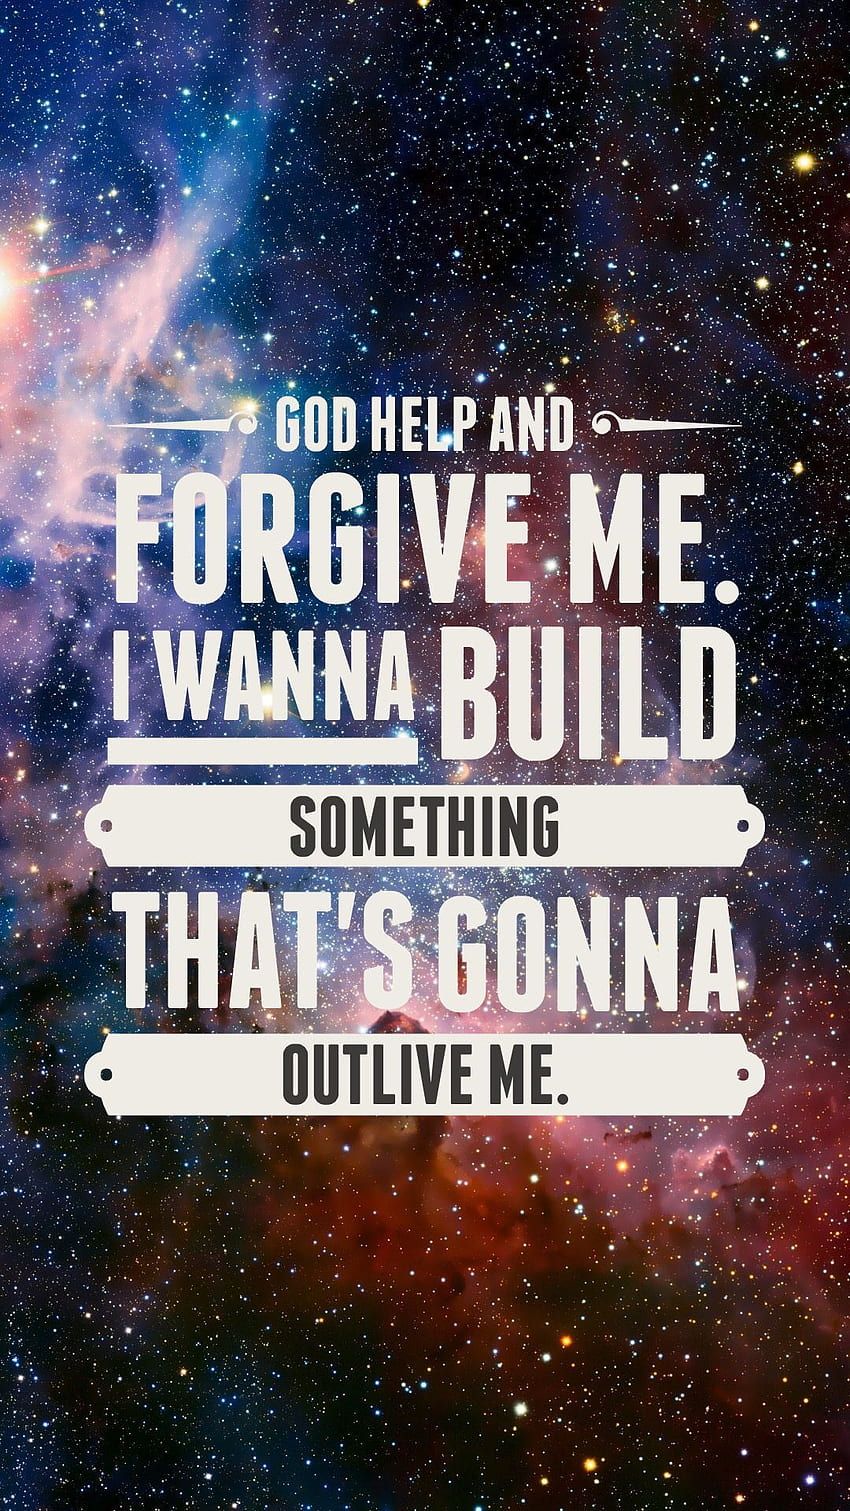 God help and forgive me. I wanna build something that's gonna outlive me. - Broadway, Hamilton